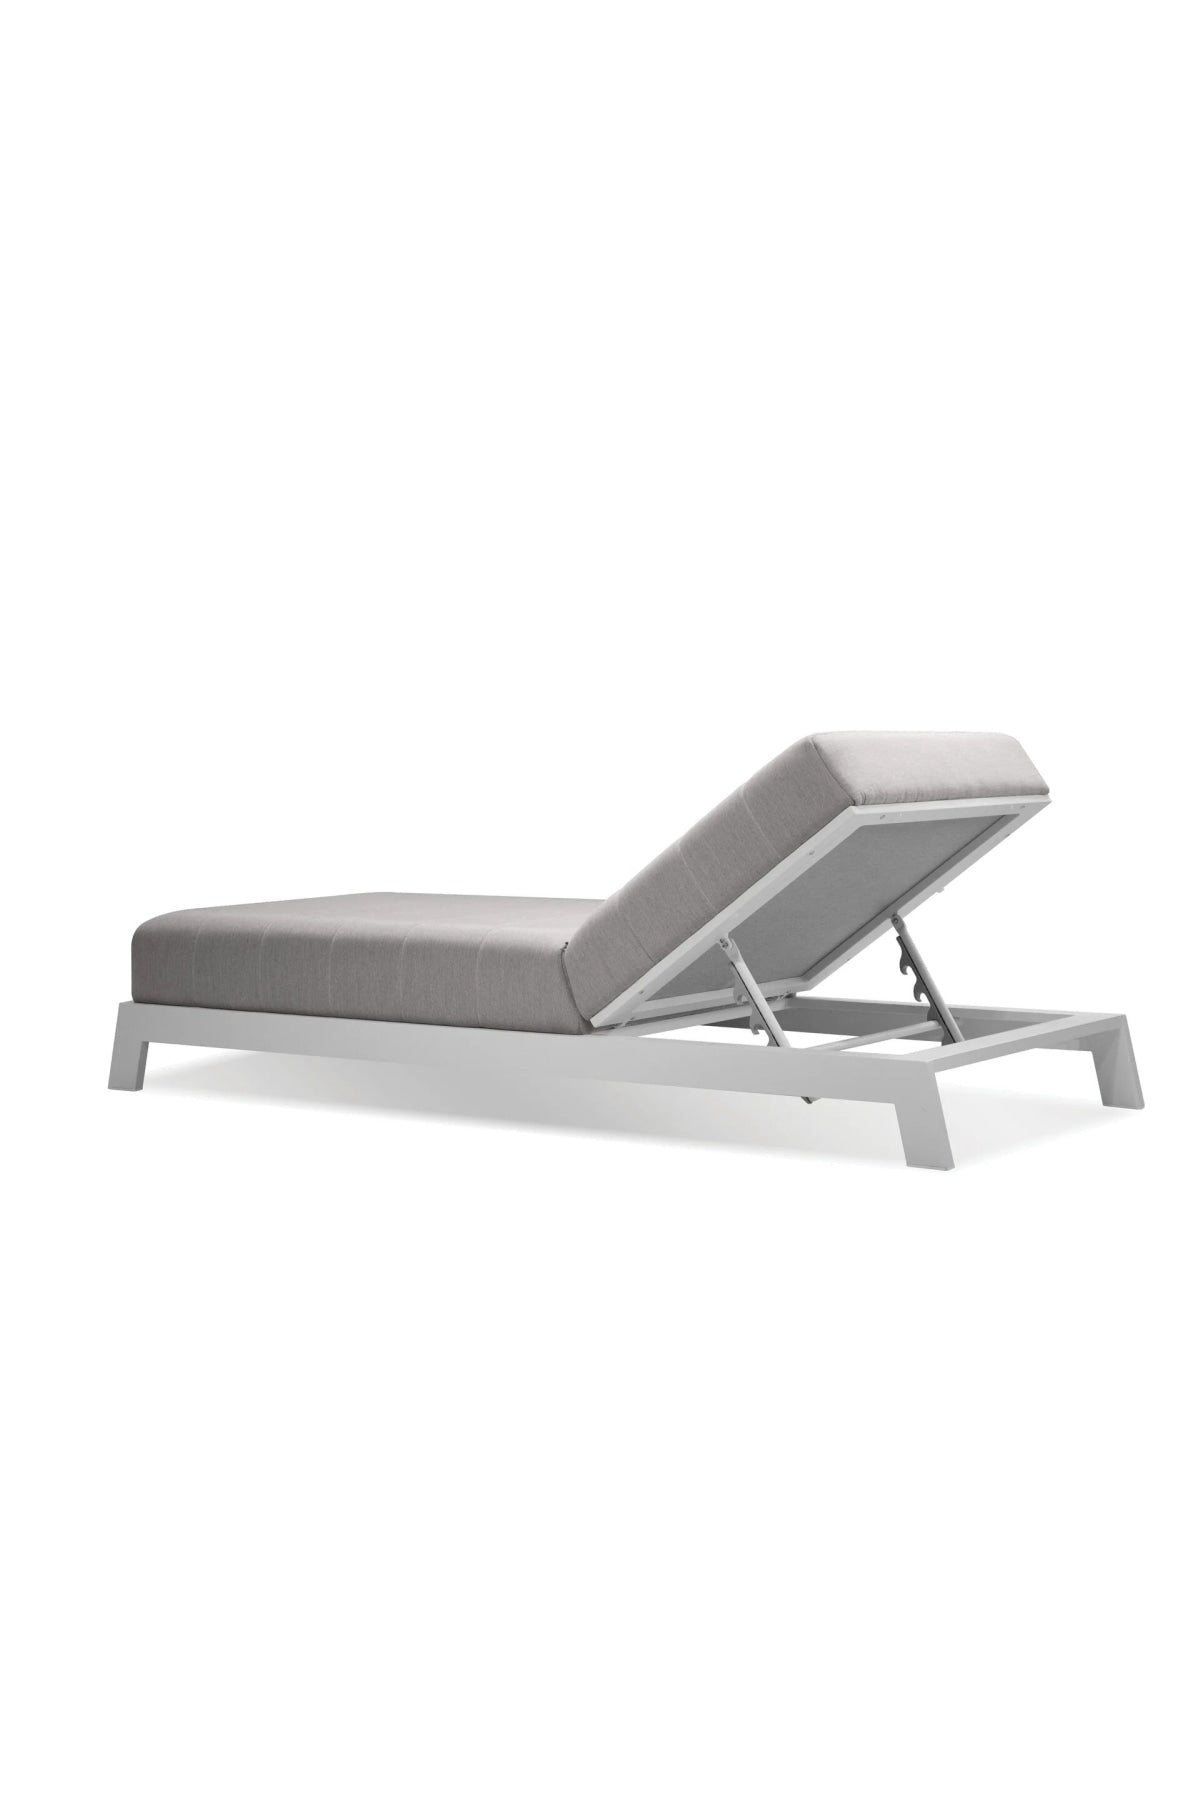 Oceana Outdoor Chaise Lounge